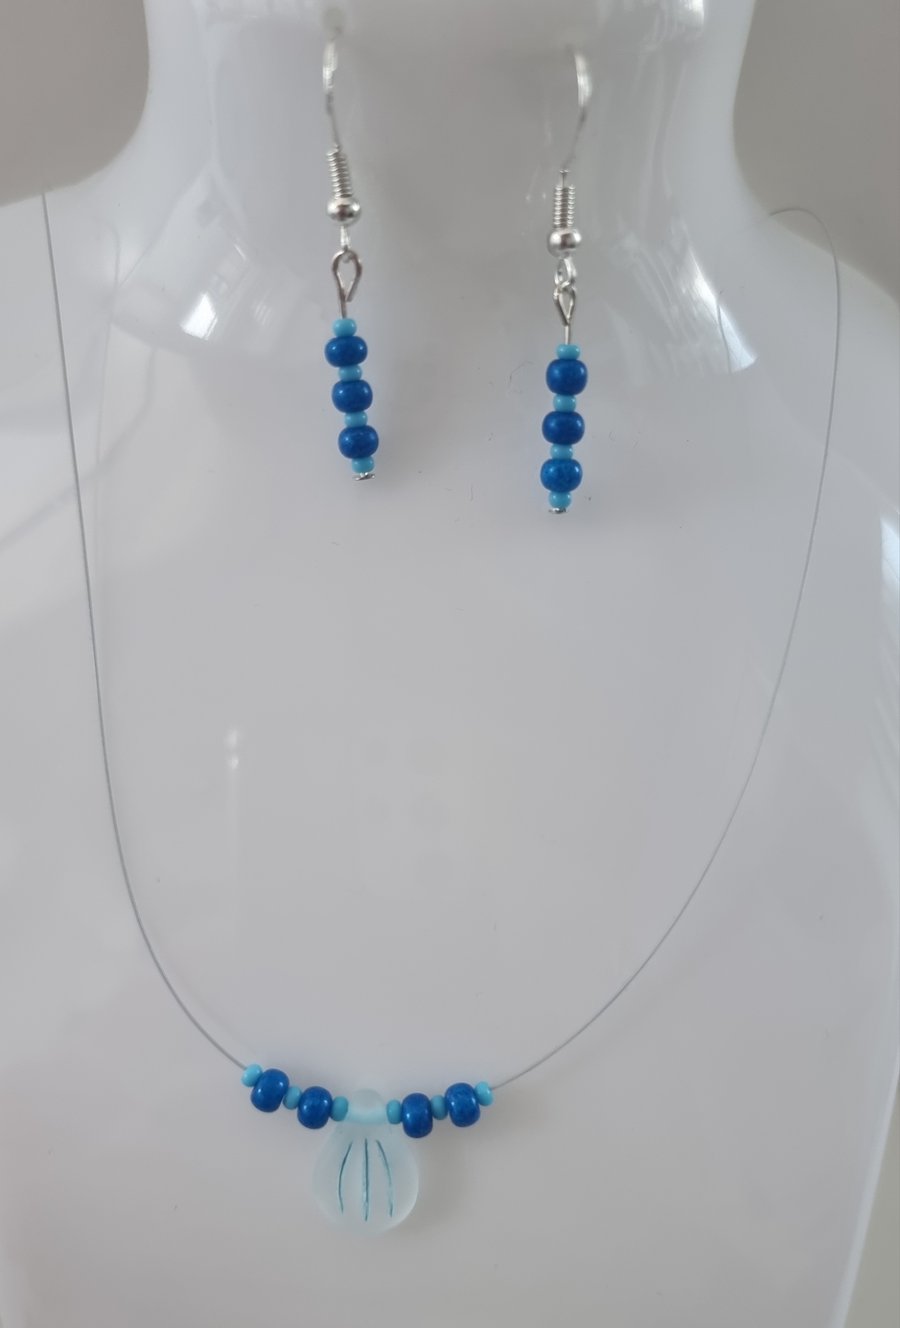 Light blue engraved Pip bead necklace and earrings set